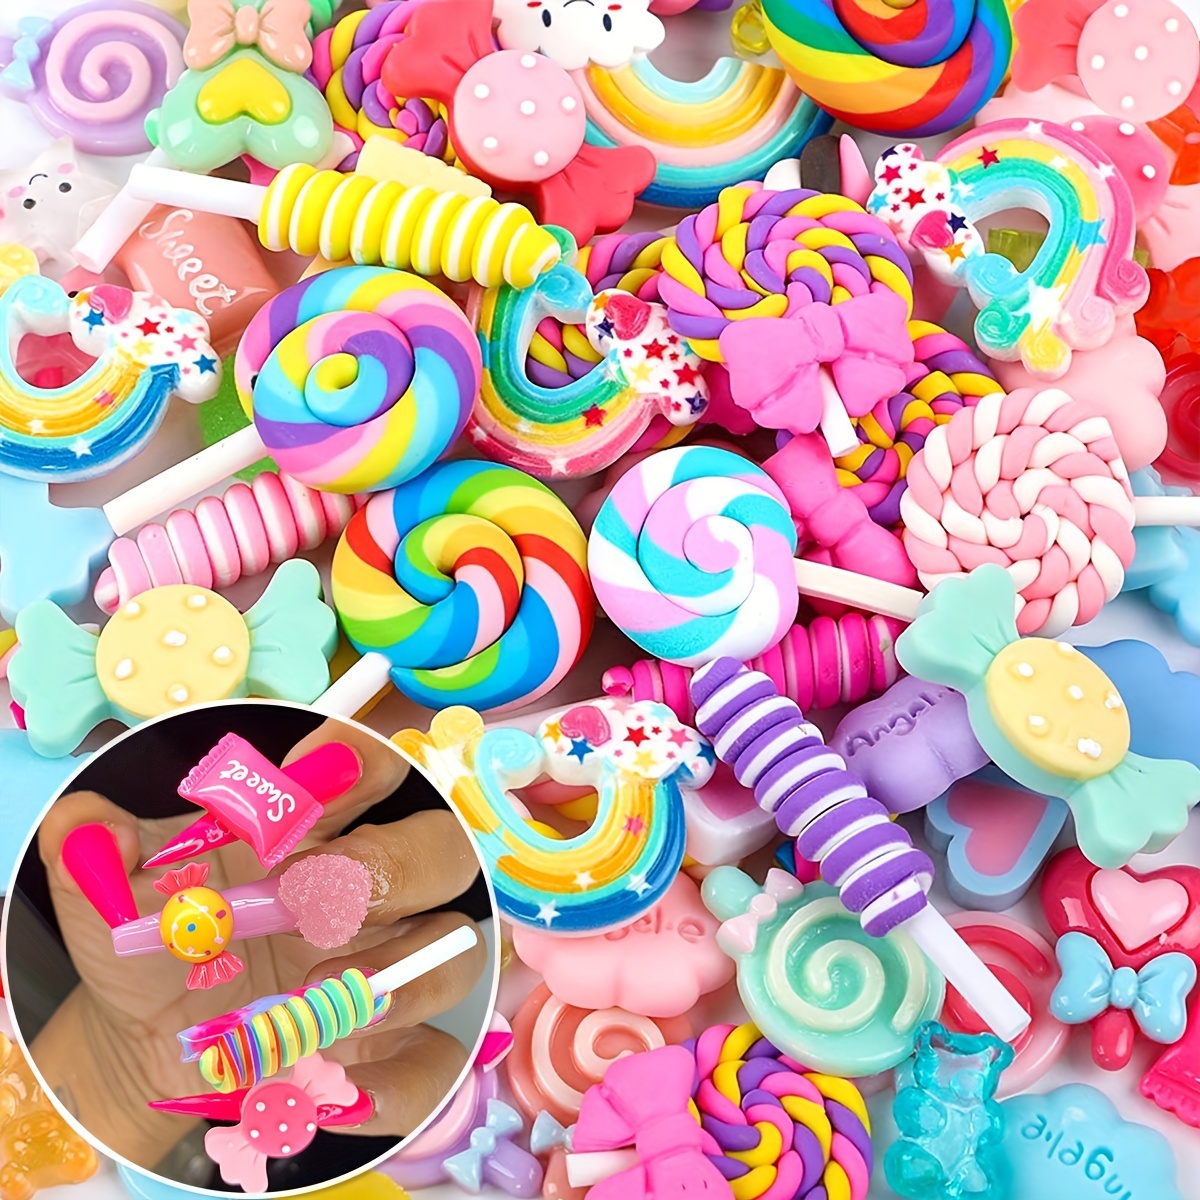 

20/40pcs Candy Nail Art Charms For Slime And Nails - Cute Fruits And Sweets Resin Nail Art Accessories For Crafts And Nail Art Decoration